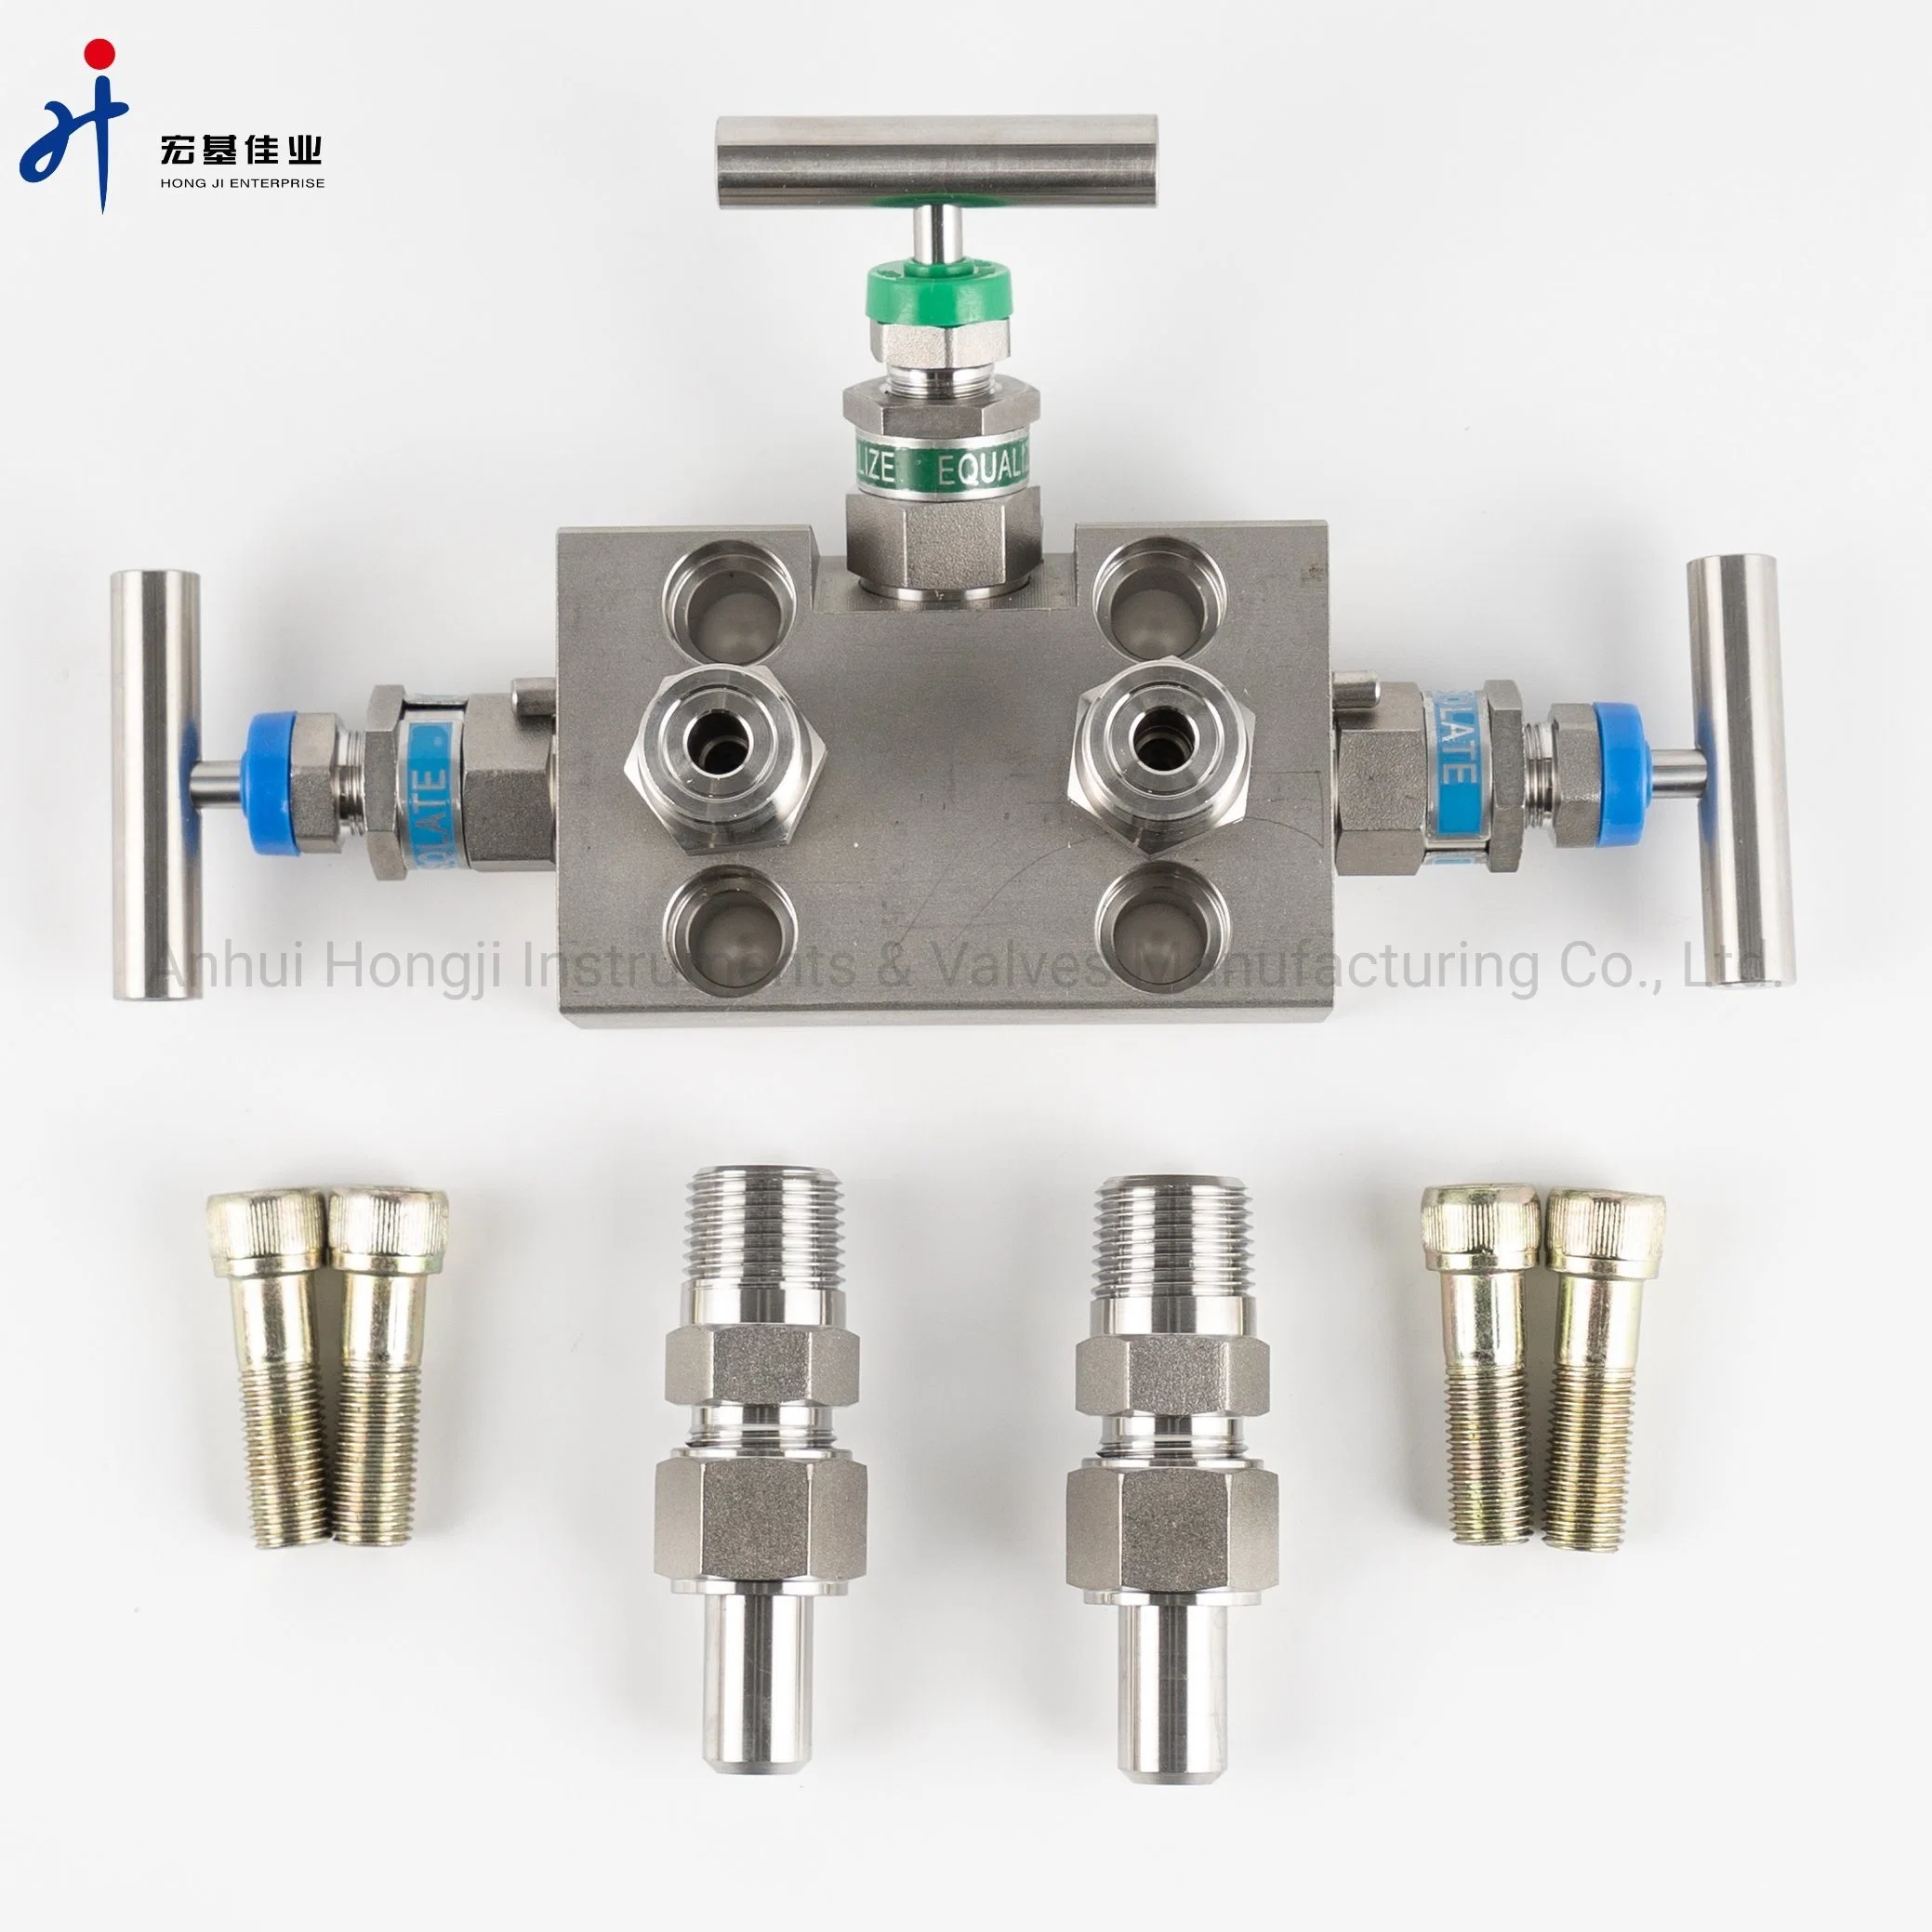 Needle Valve Nanufacture High Pressure 3-Valve Manifolds 6000psi Produce with Stainless Steel 3% off